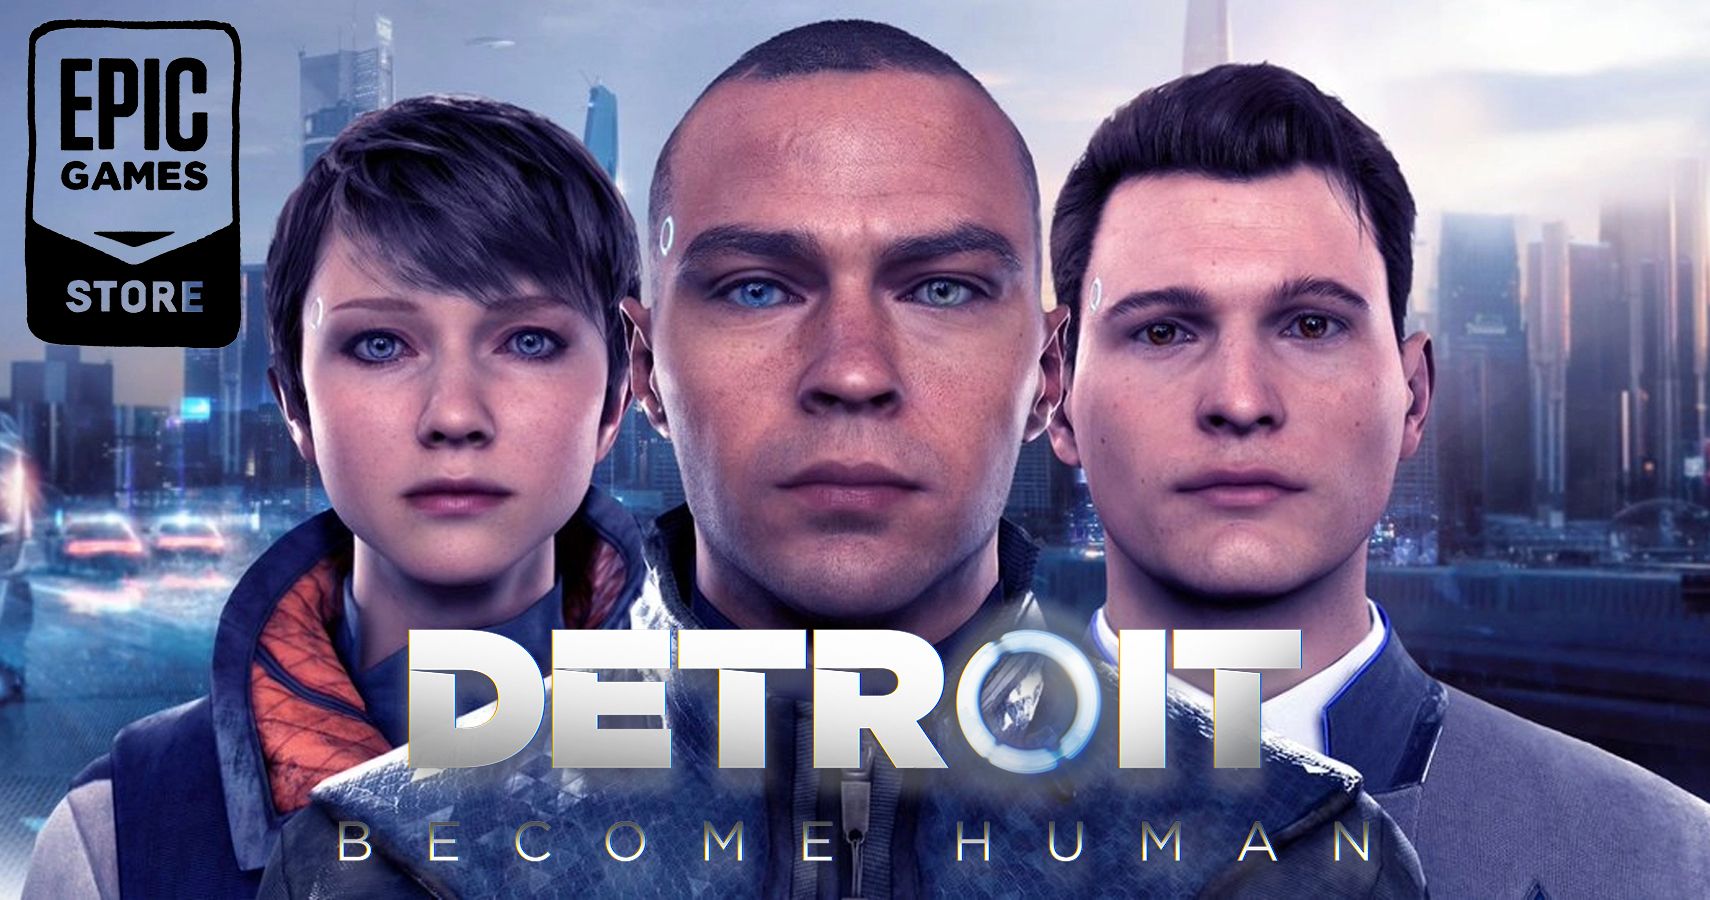 Detroit: Become Human - PC Release Date Trailer